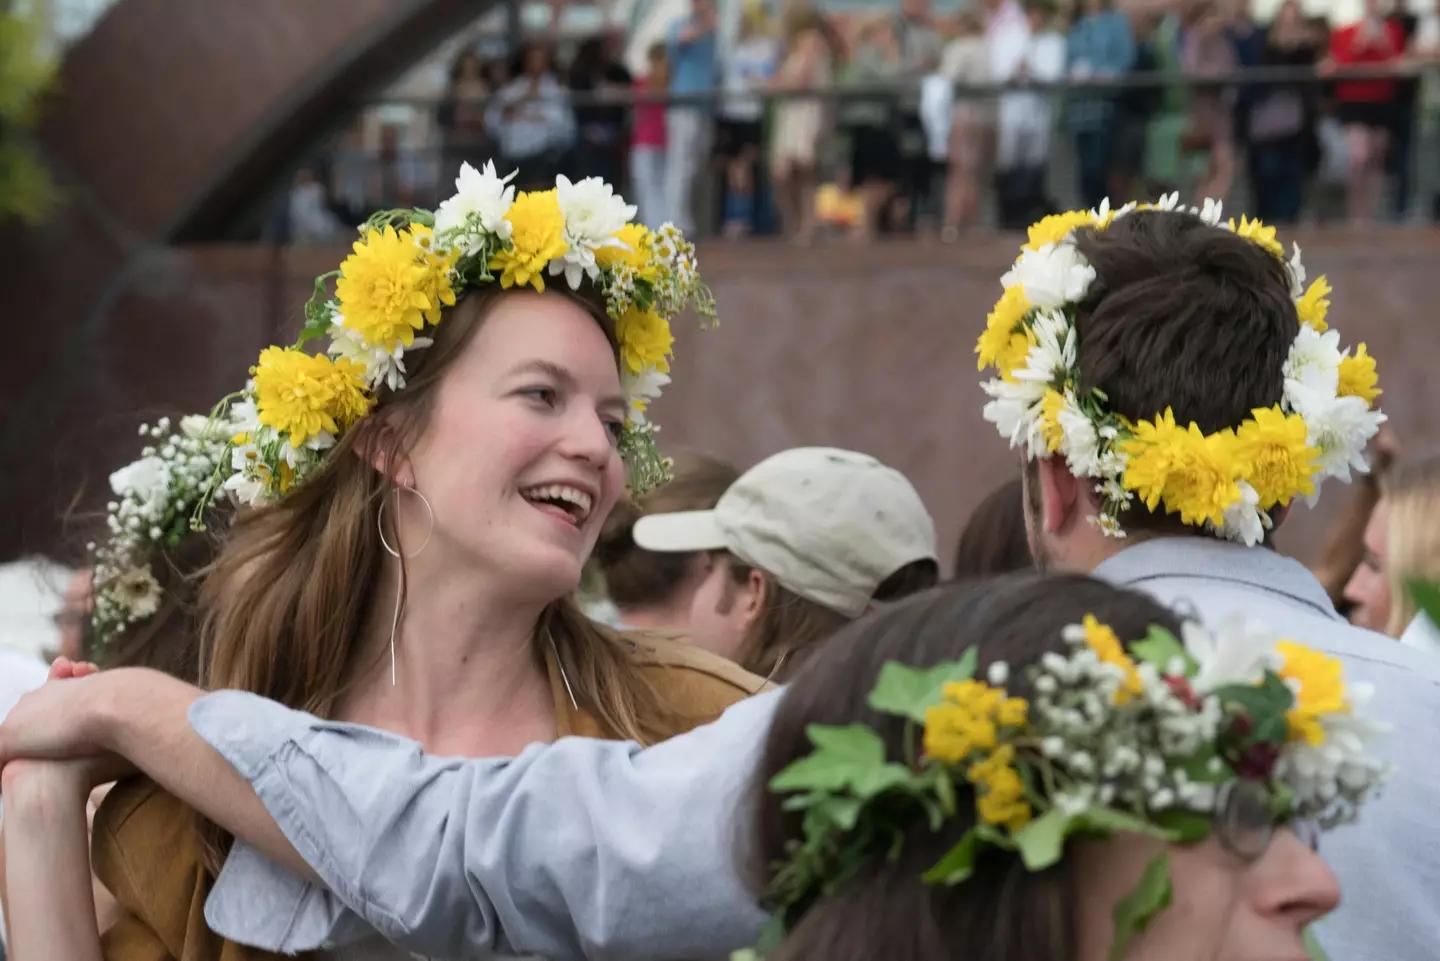 Lots of dancing and music takes place at the Swedish Midsummer Festival.